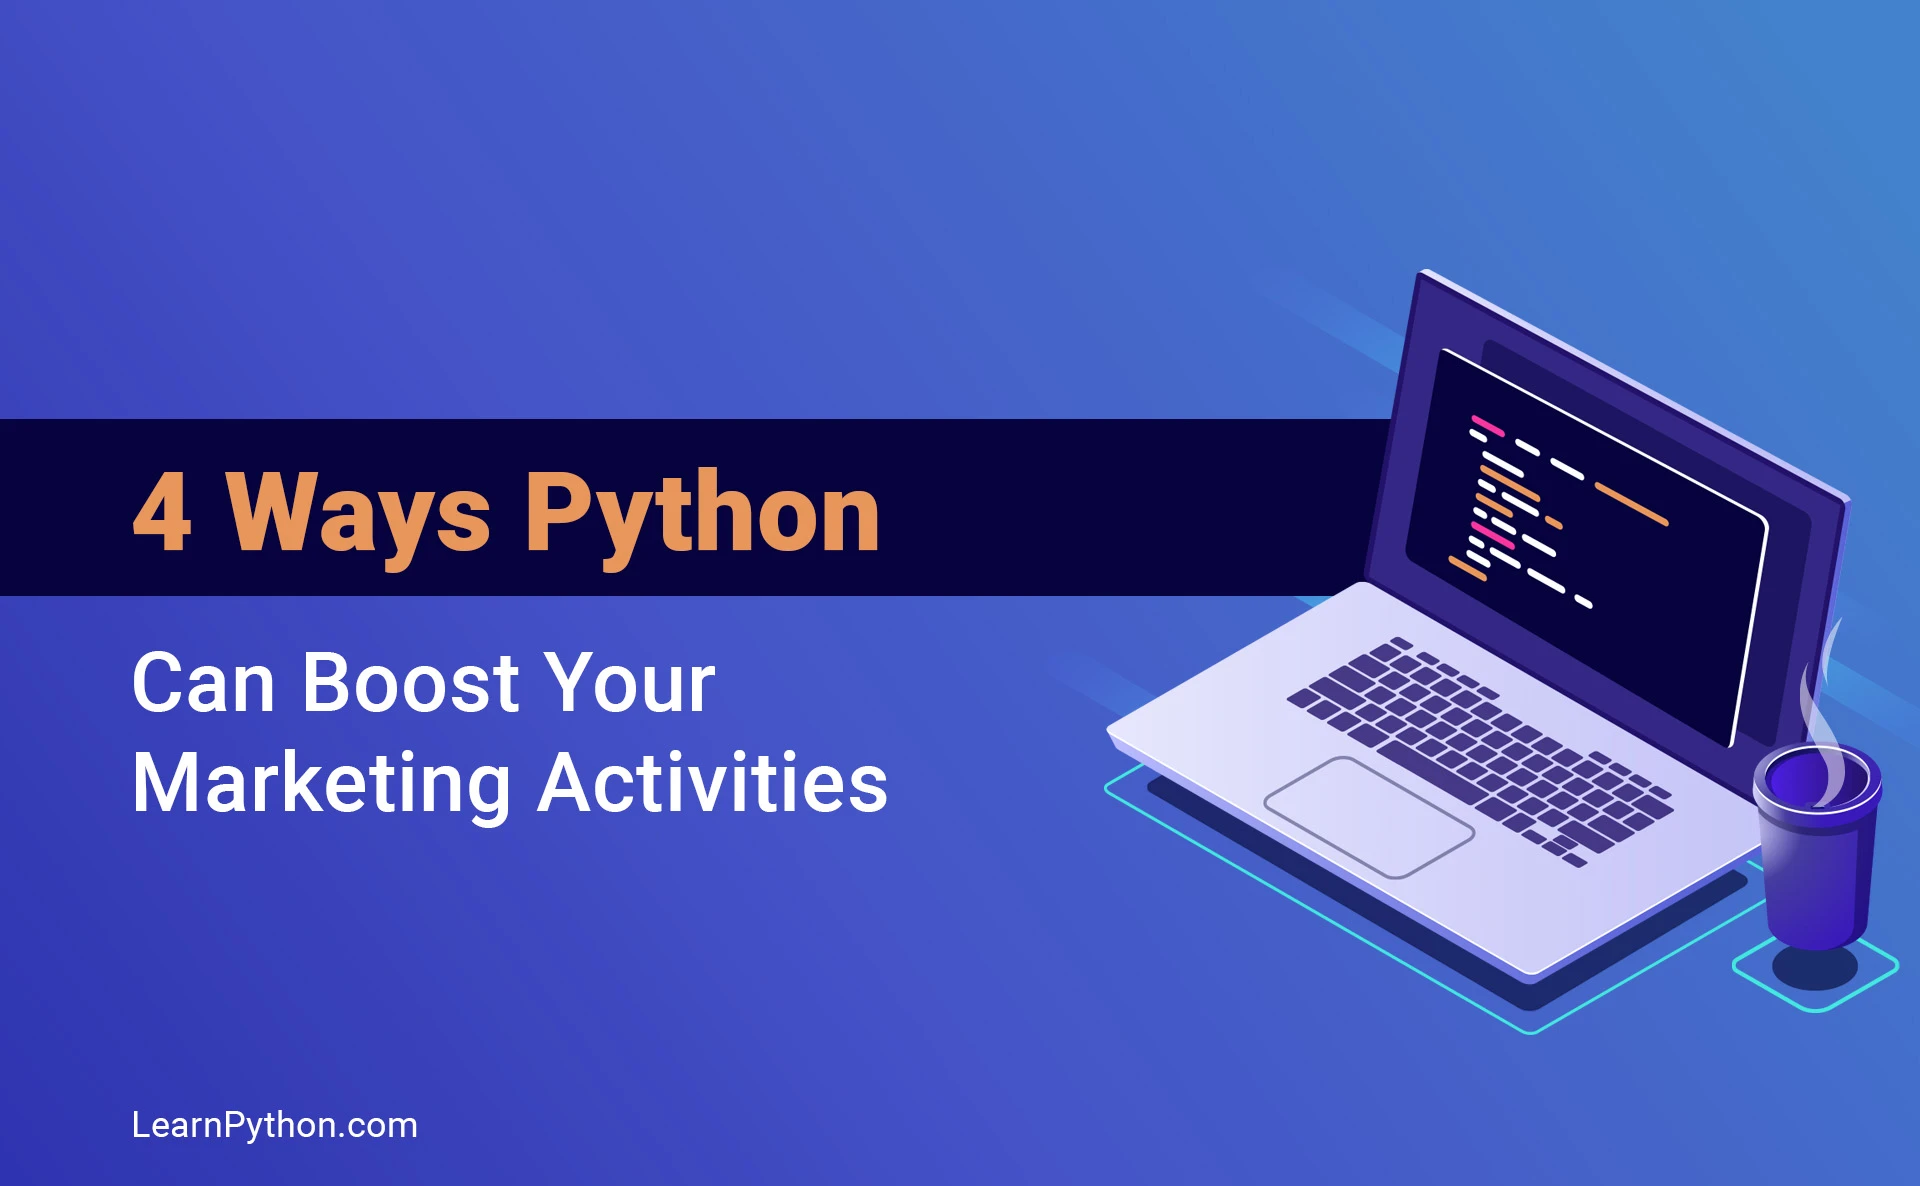 4 Ways Python Can Boost Your Marketing Activities